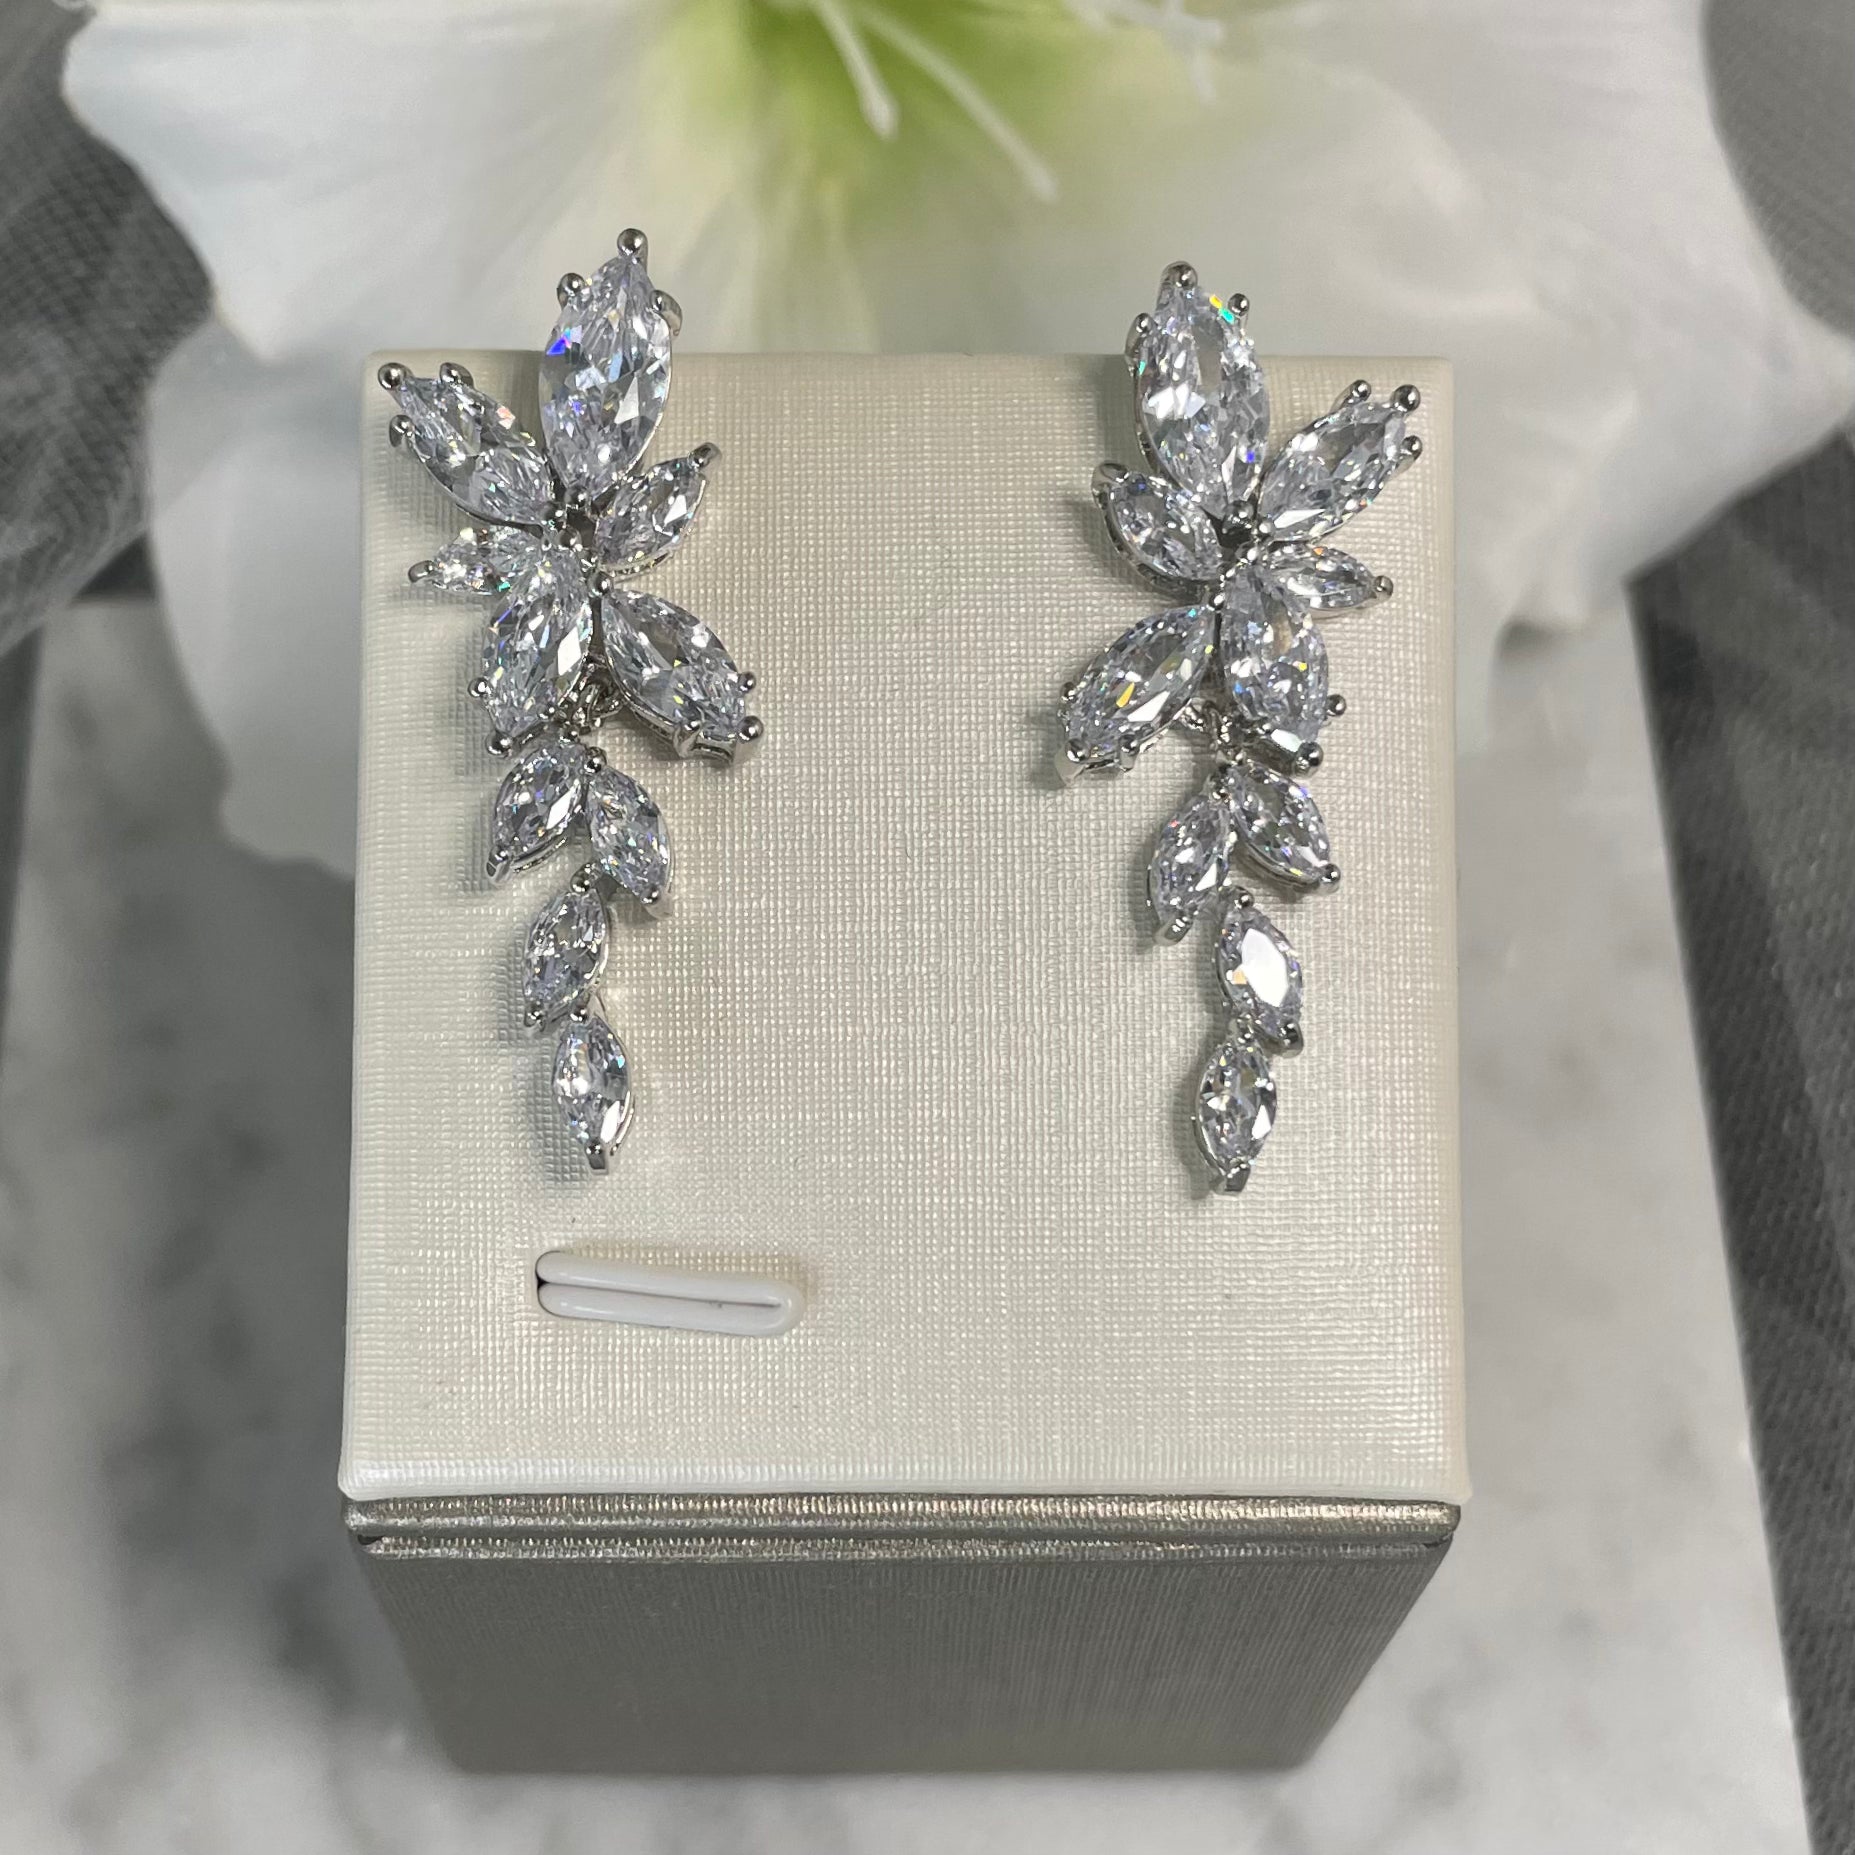 Lizzy cubic zirconia bridal earrings with cascading flower-shaped and leaf-like crystals, designed for sophisticated sparkle and elegance on your wedding day.